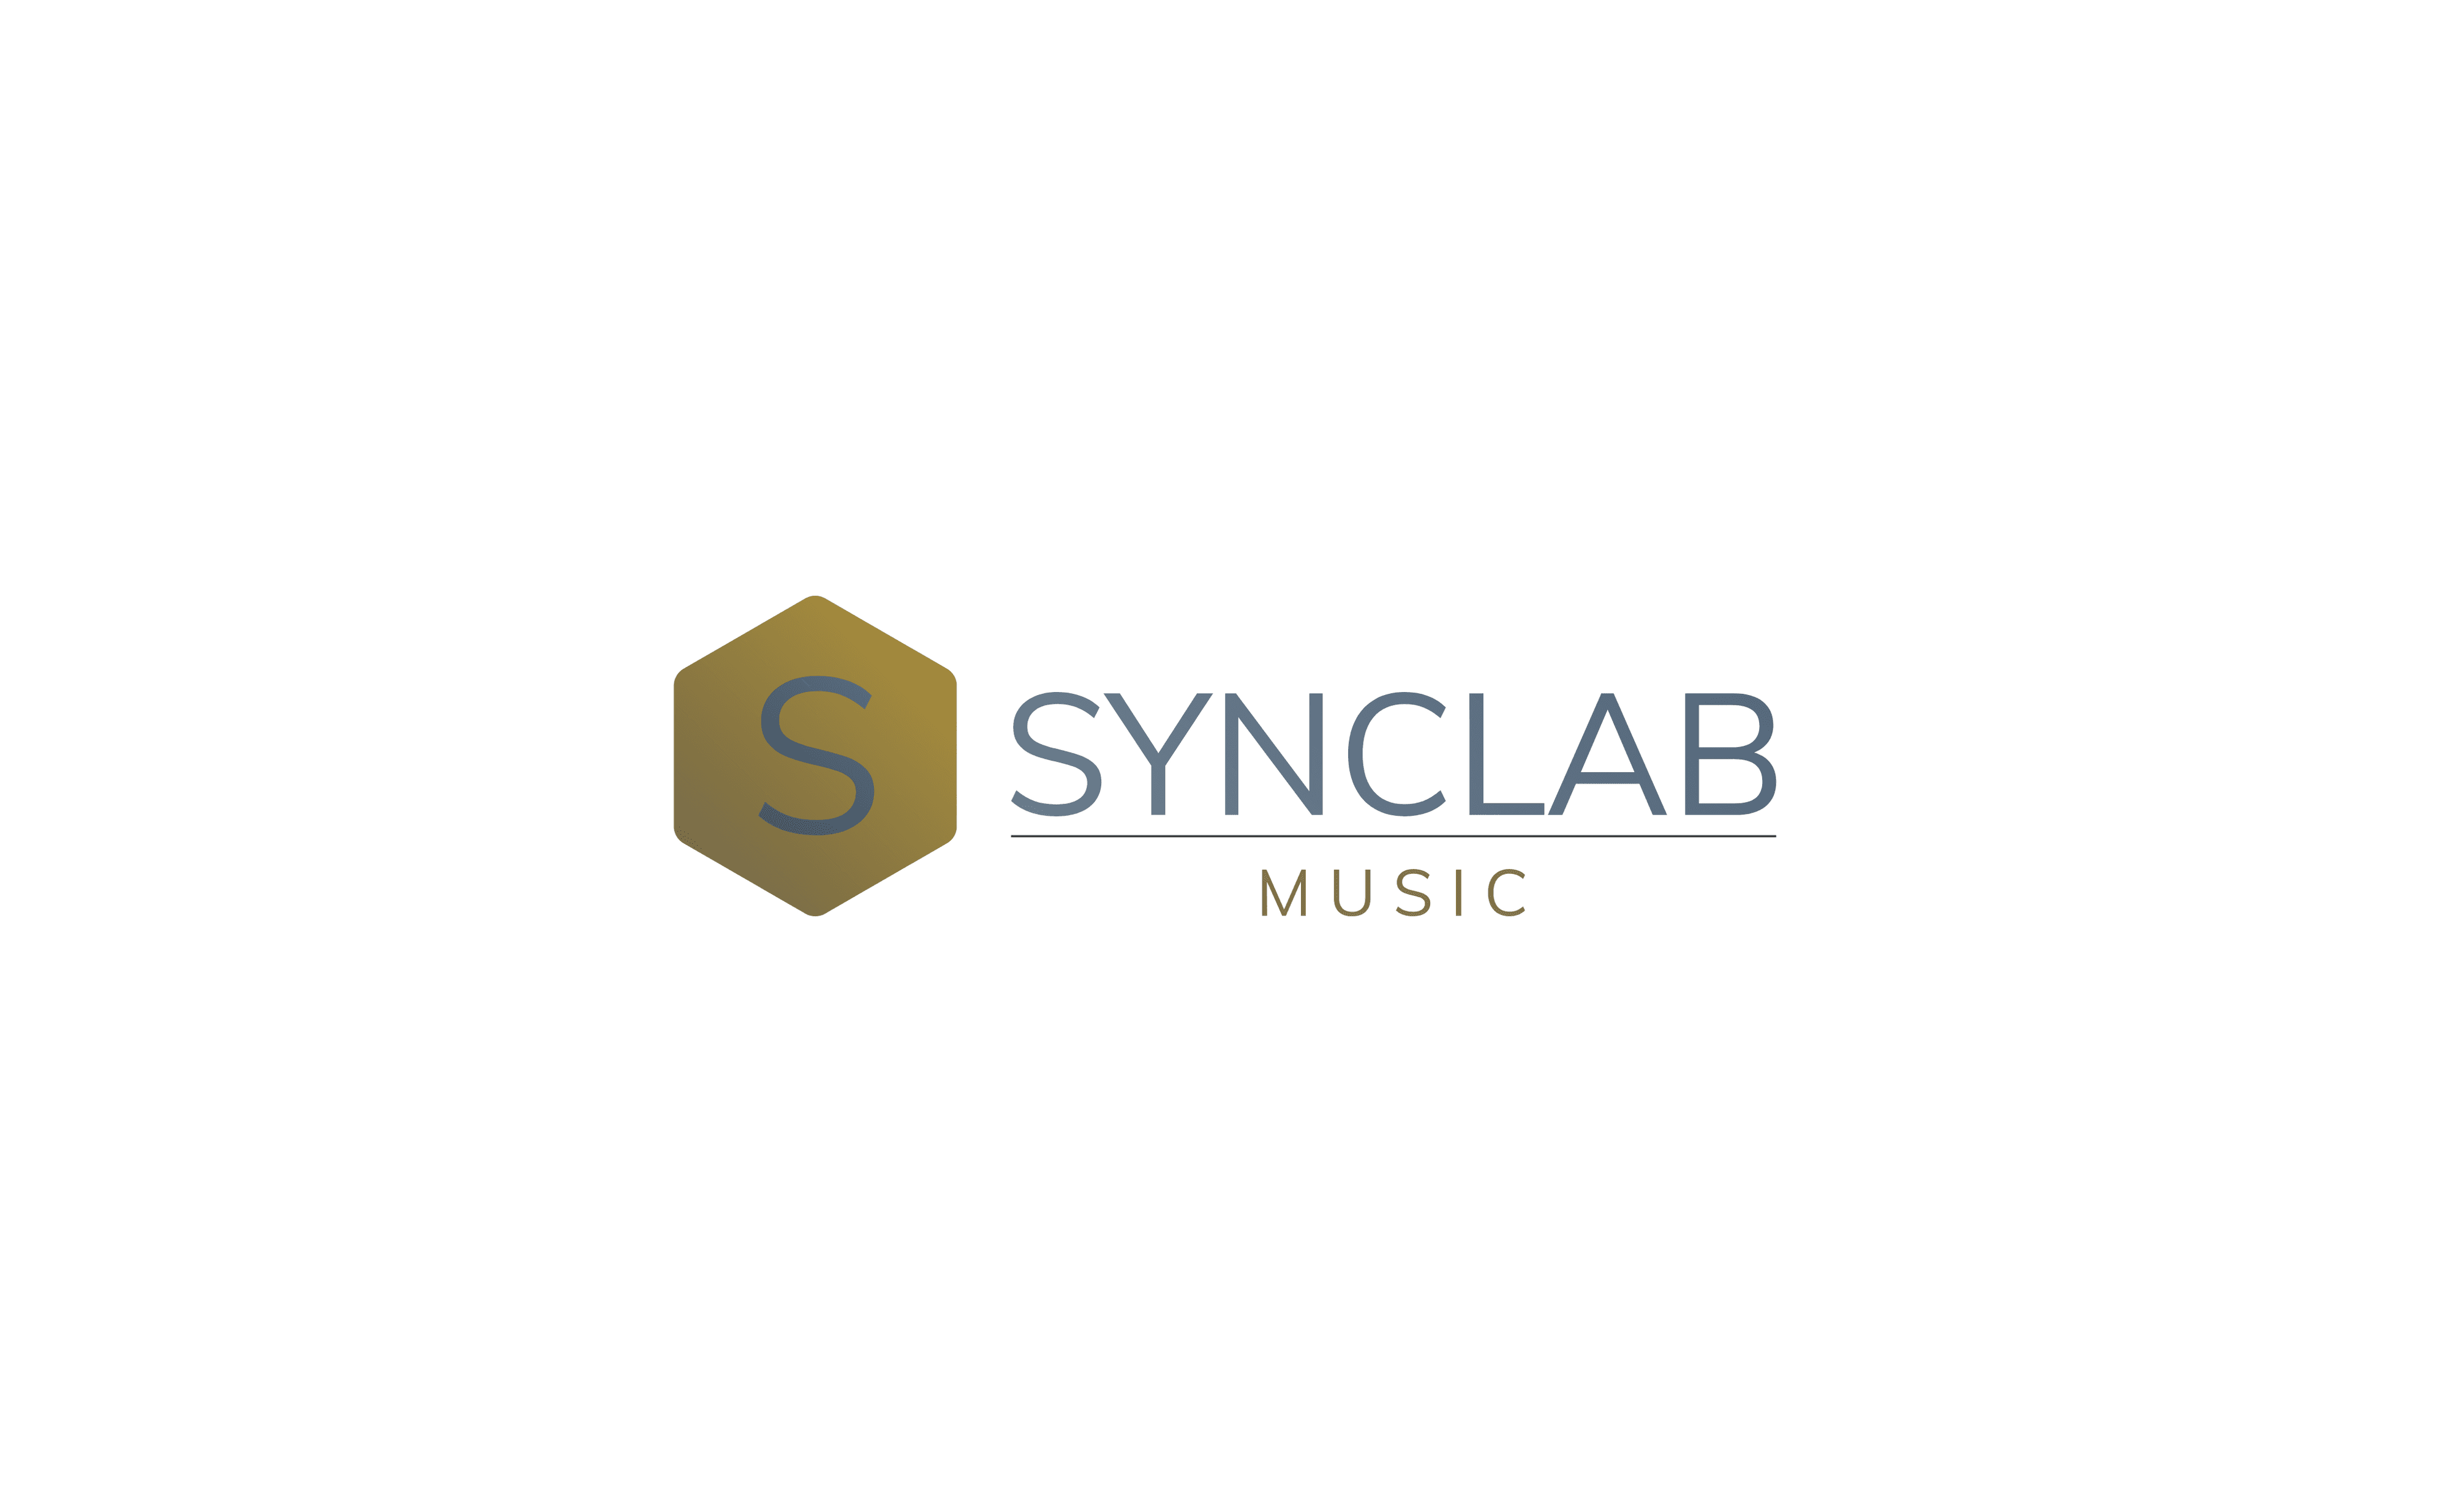 Synclab_Music バナー